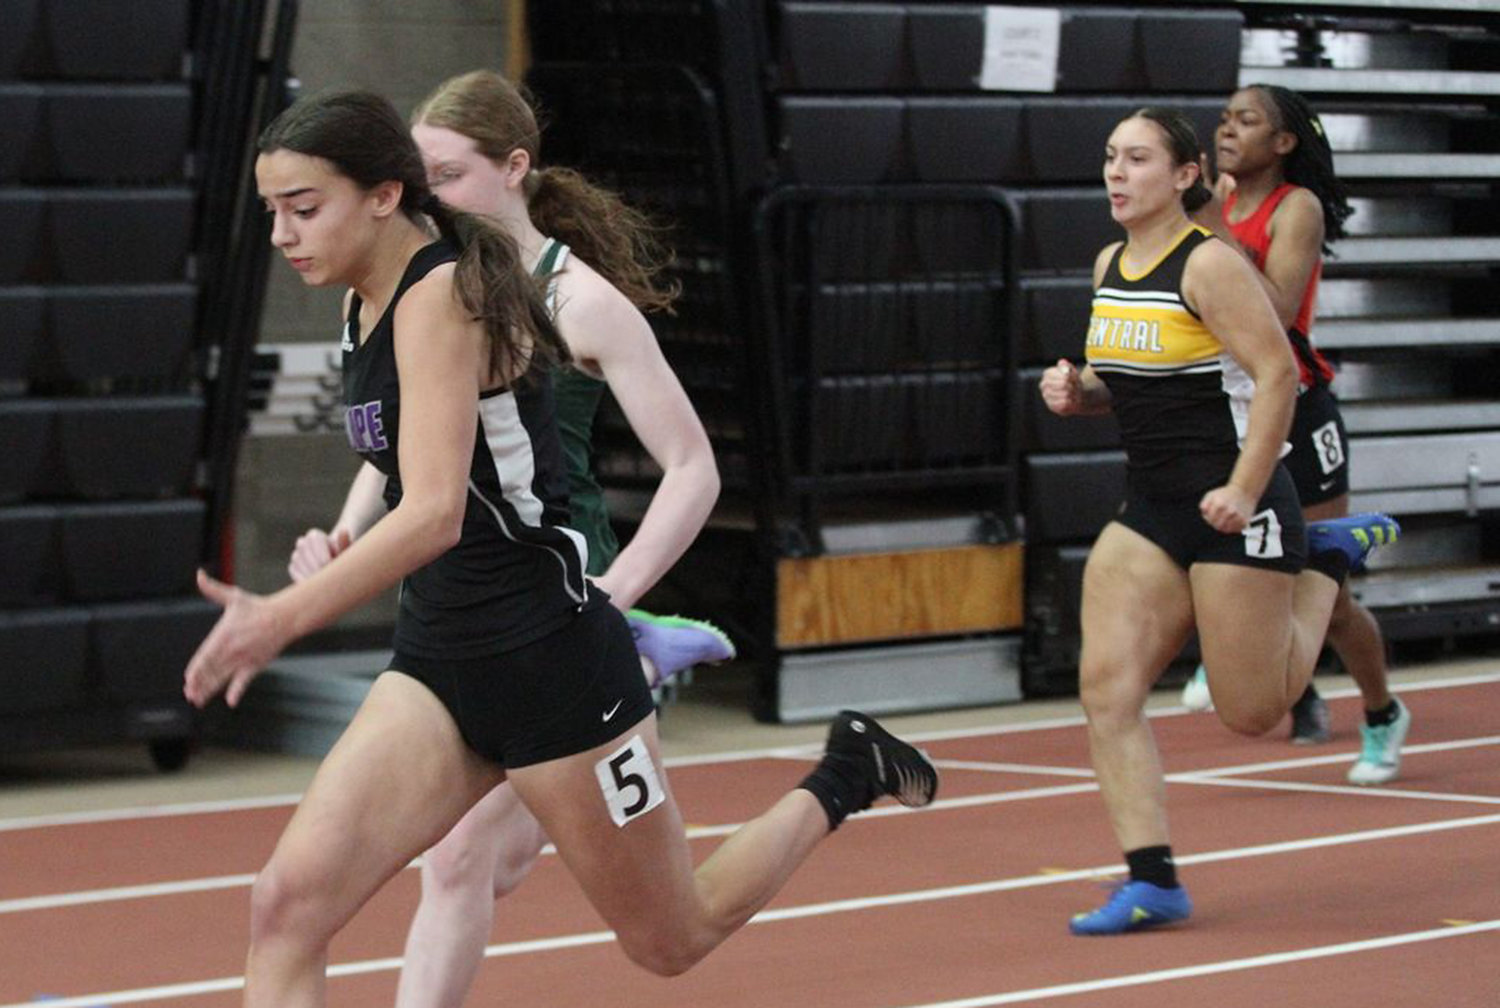 Freshman Thea Jackson placed first in the 55 meter run. Jackson scored 30 points for the Huskies and also placed second in the long jump, second in the 4x200 meter relay and fifth in the 55 meter hurdles.